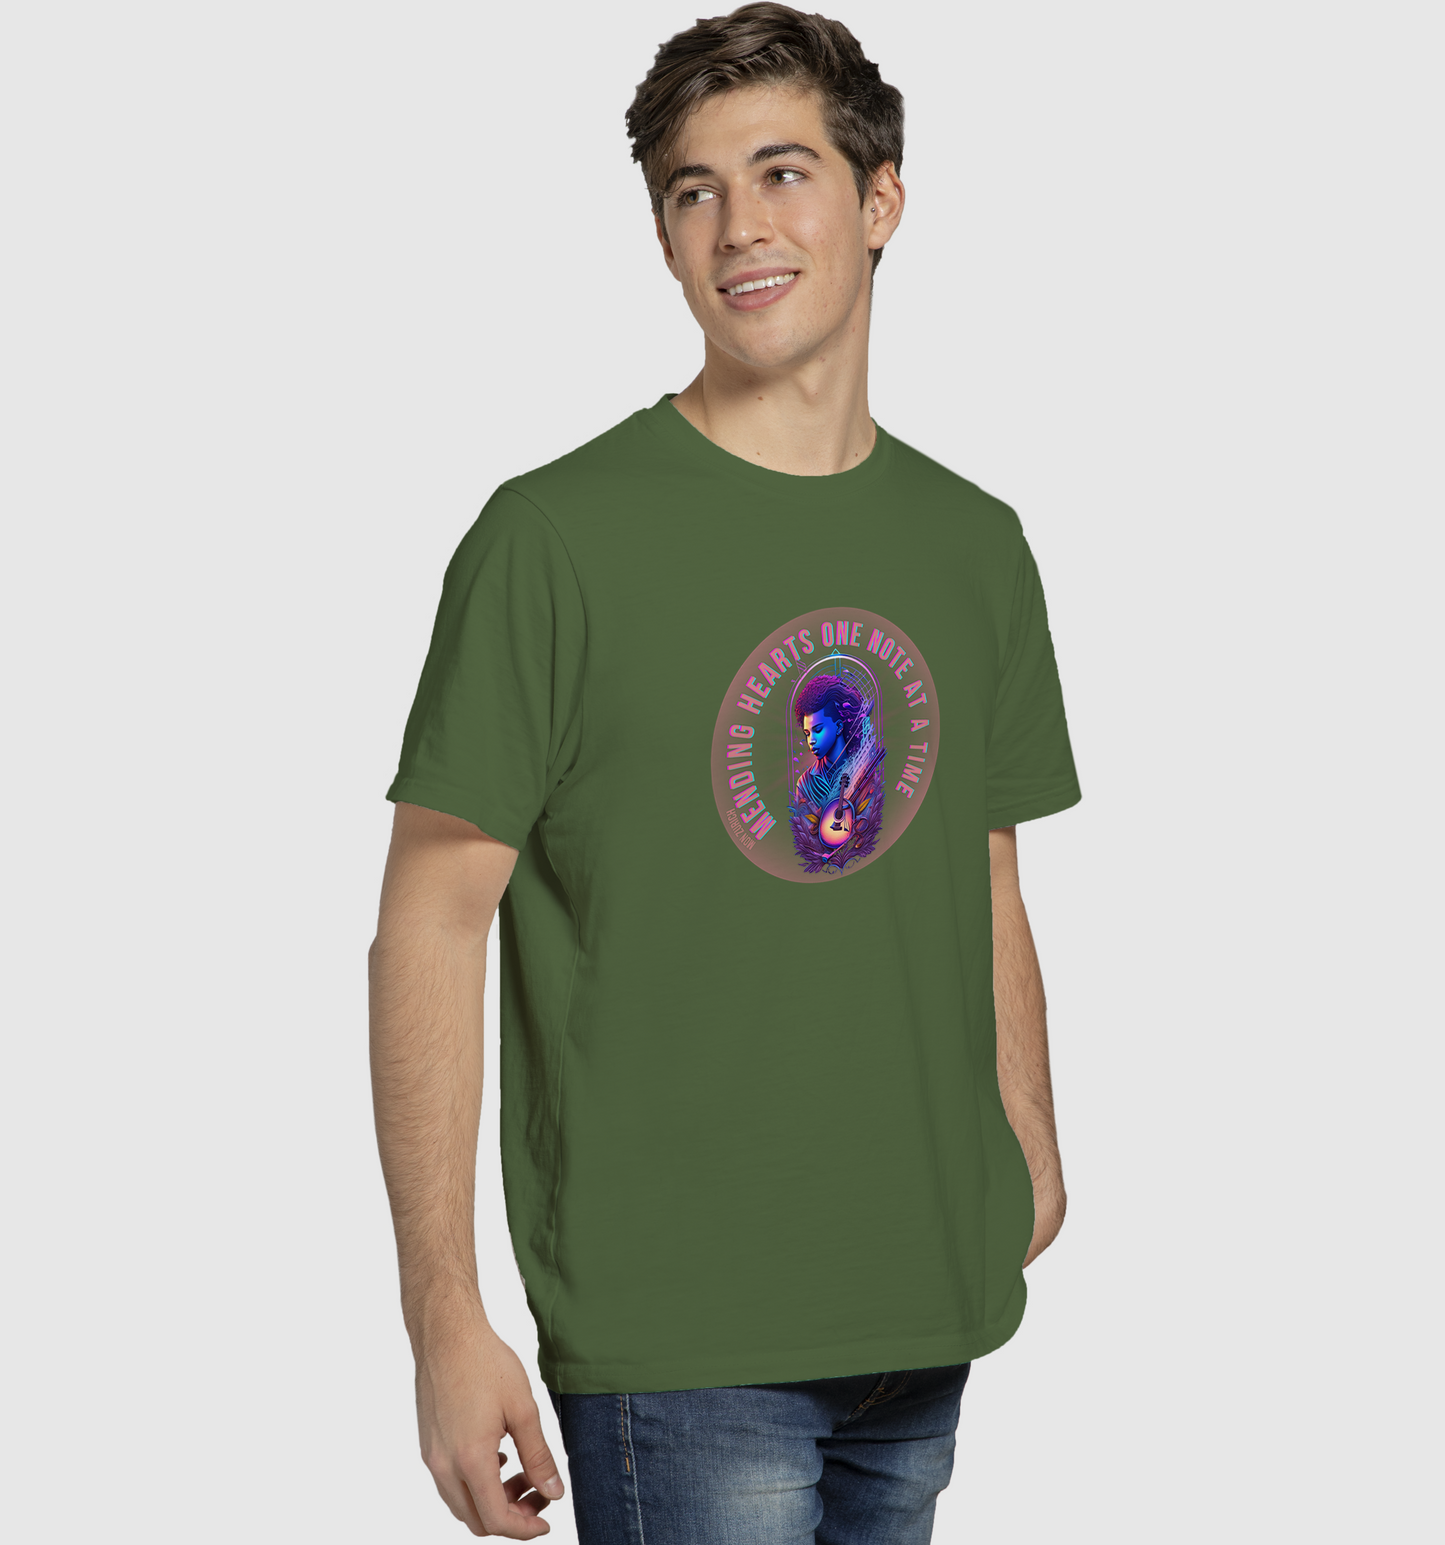 Mending hearts one note at a time T-shirt in Light - Mon Zurich Originals